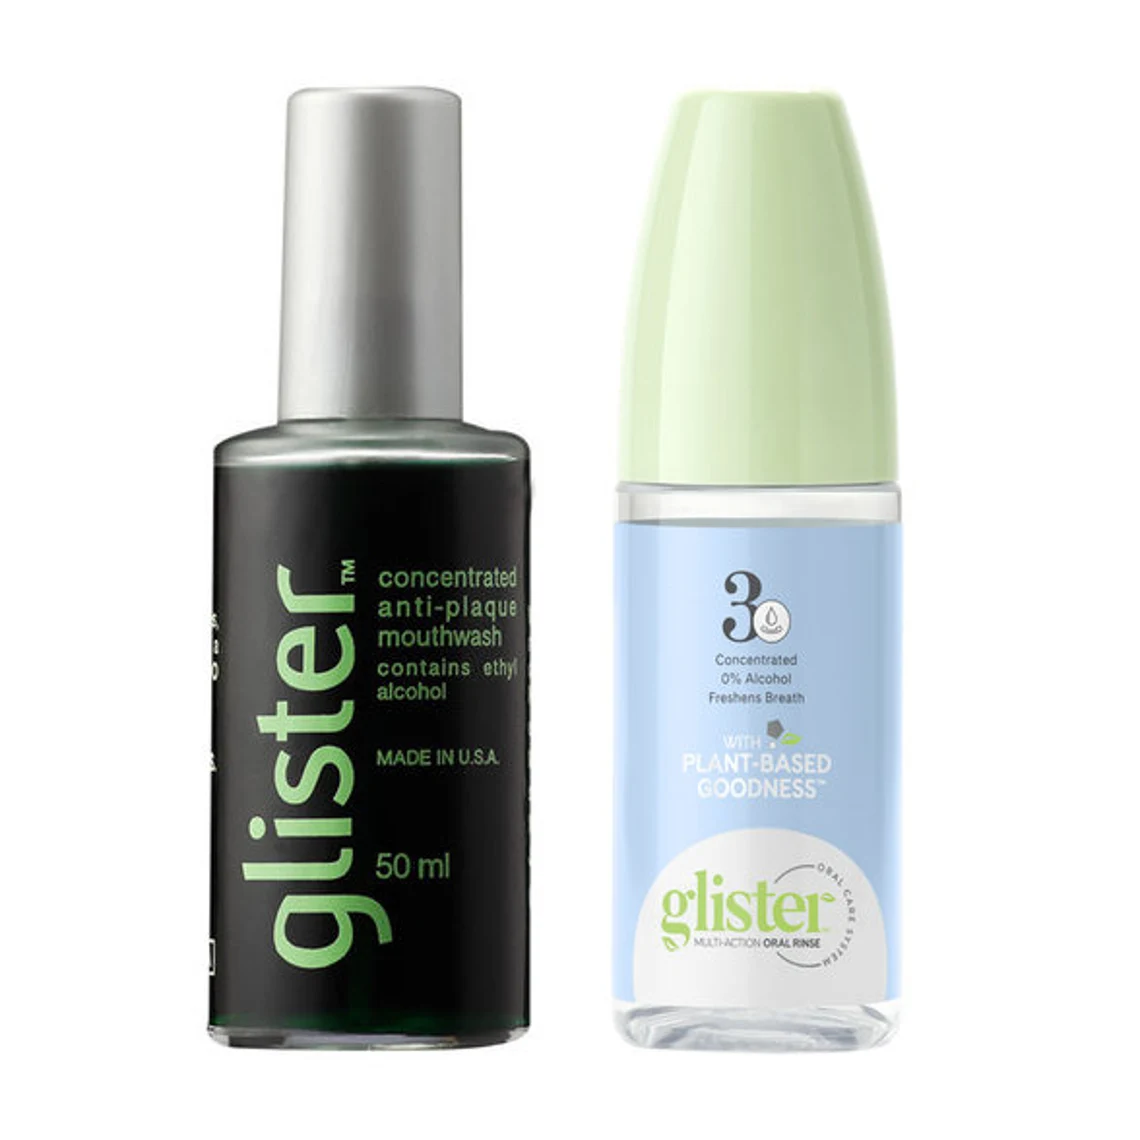 1 Bottle Amway GLISTER Concentrated Anti-Plaque Mouthwash 50ml DHL EXPRESS - $63.90